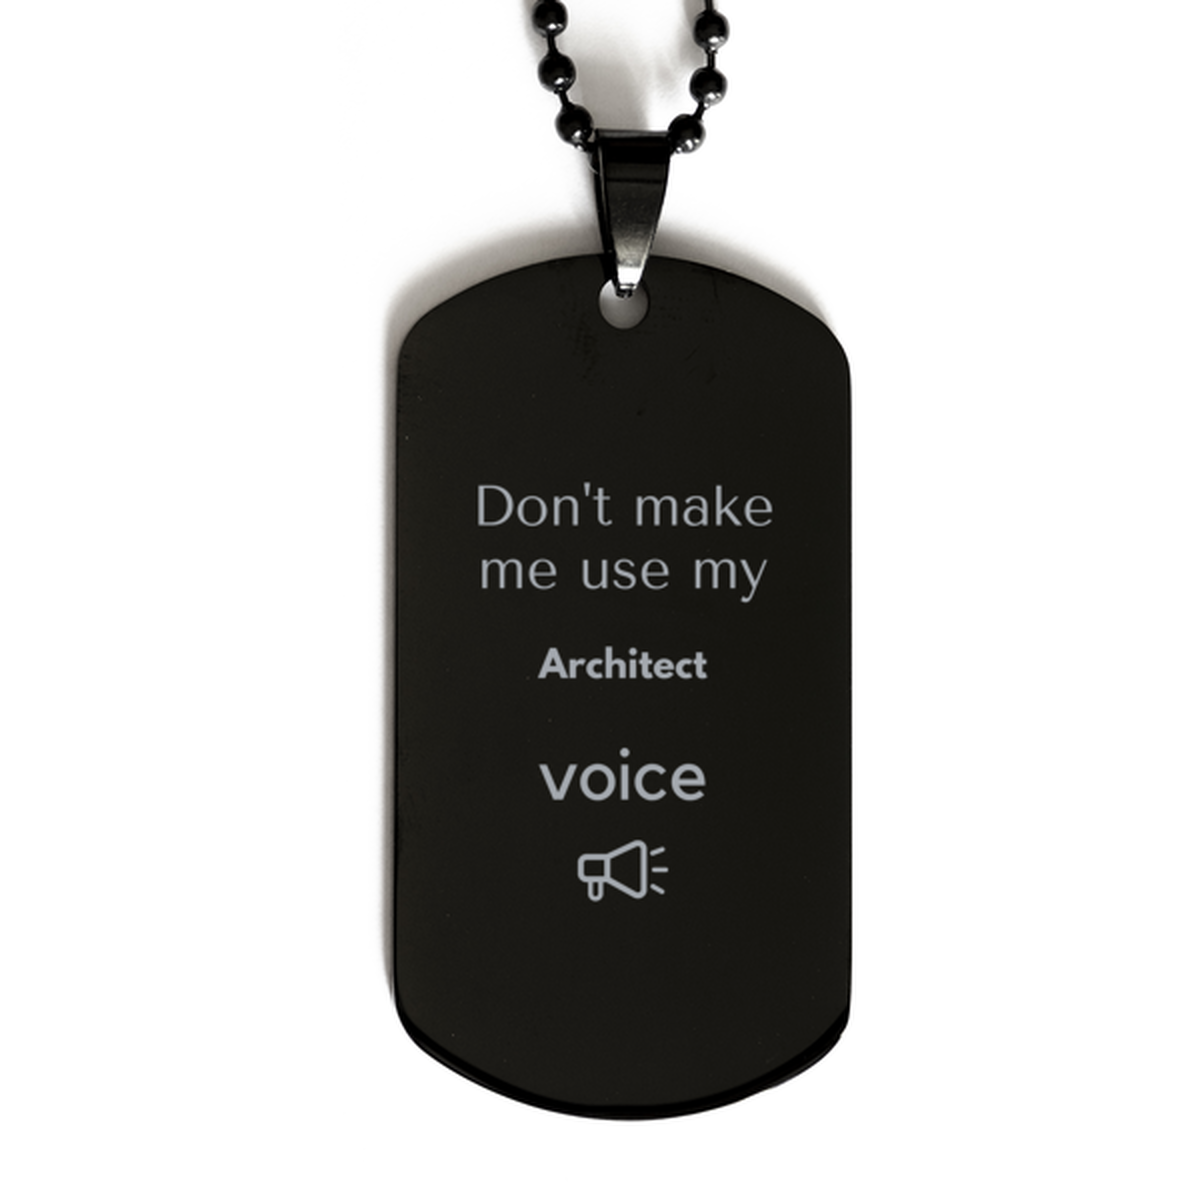 Don't make me use my Architect voice, Sarcasm Architect Gifts, Christmas Architect Black Dog Tag Birthday Unique Gifts For Architect Coworkers, Men, Women, Colleague, Friends